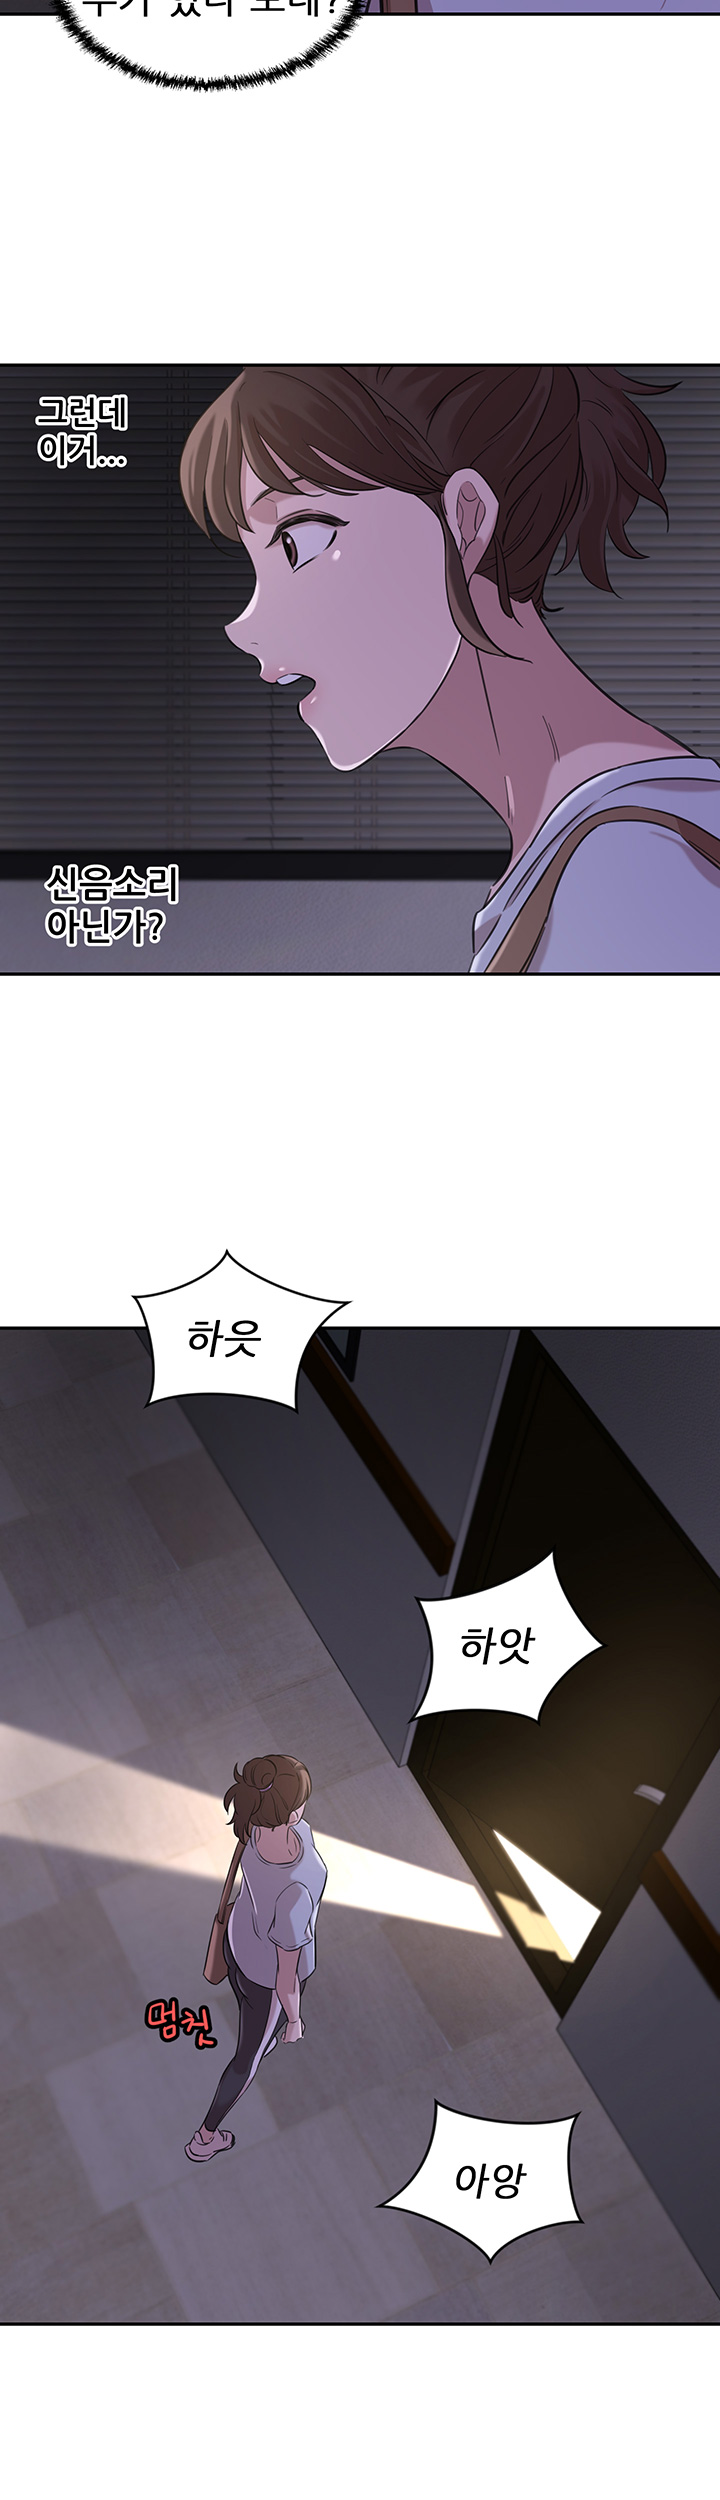 Puberty Raw - Chapter 1 Page 50